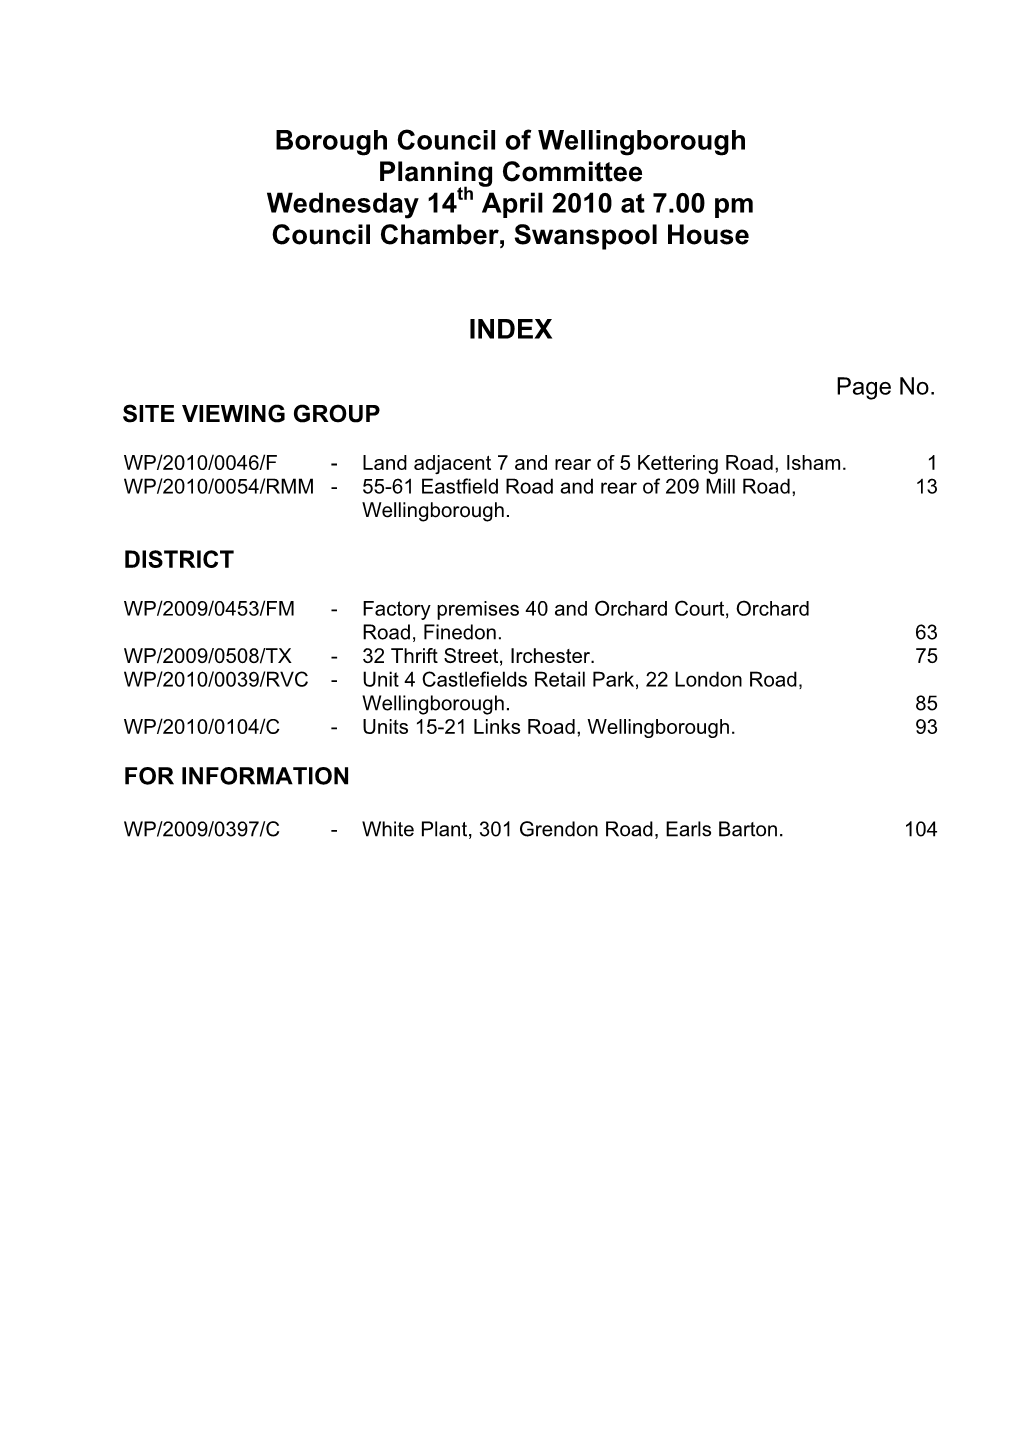 April 2010 at 7.00 Pm Council Chamber, Swanspool House INDEX